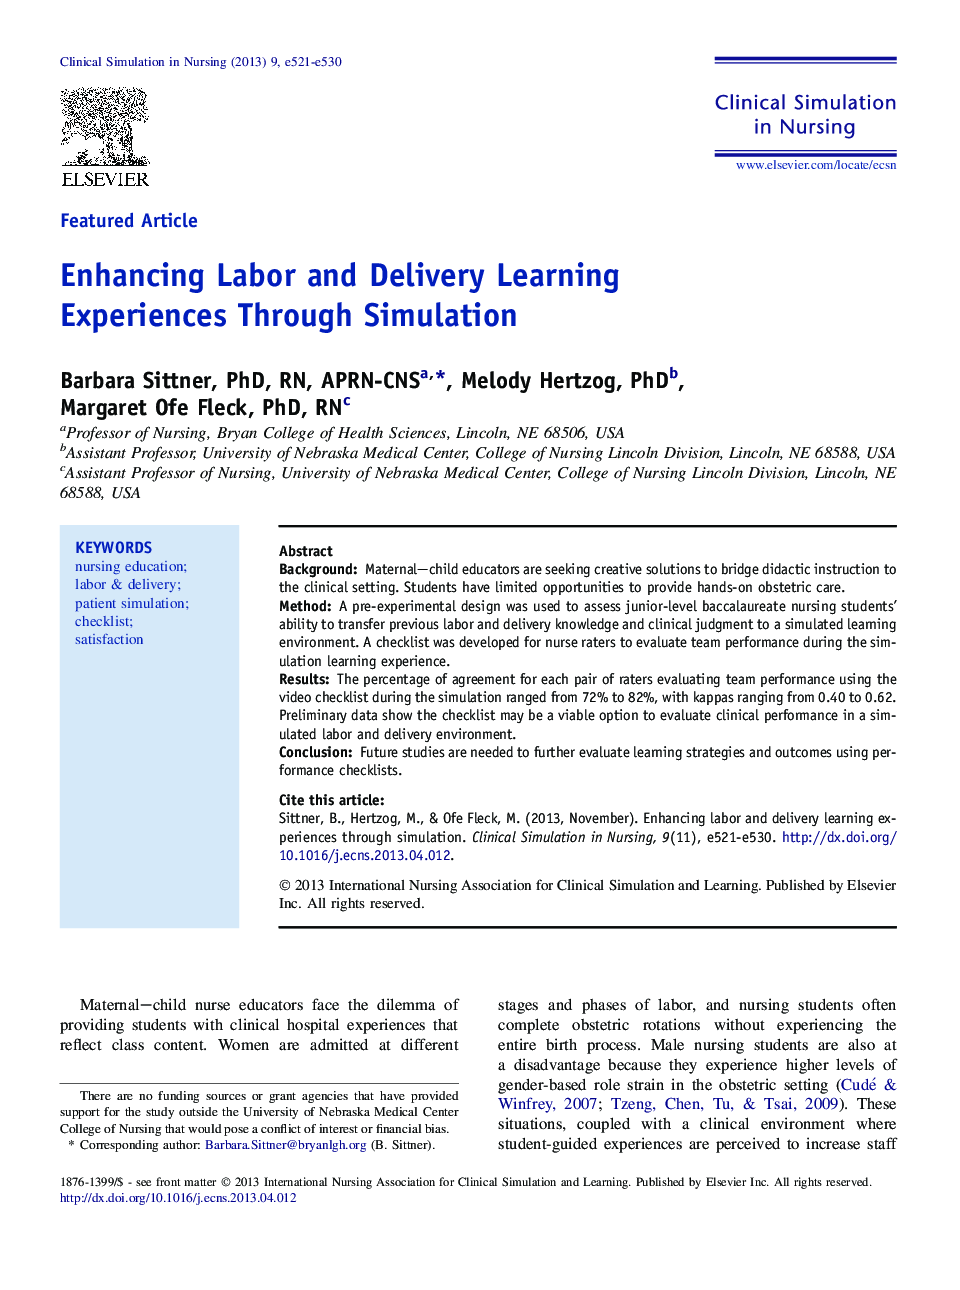 Enhancing Labor and Delivery Learning Experiences Through Simulation 